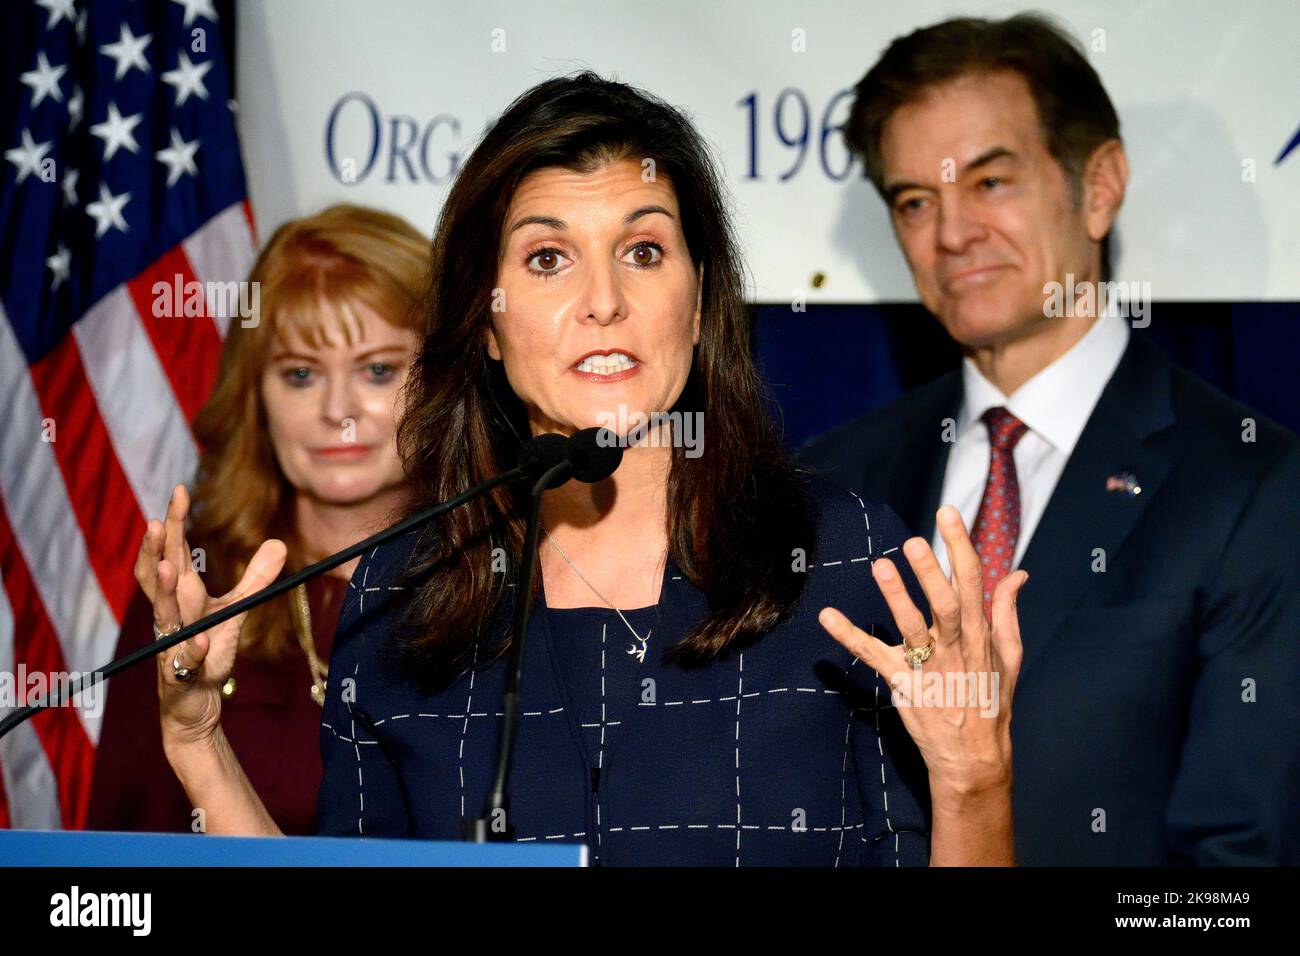 Harrisburg, Untied States. 26th Oct, 2022. Republican candidate for Senator Mehmet Oz listens as Former Governor of South Carolina Nikki Hailey speaks in Harrisburg, PA, USA on October 26, 2022. TV-personality Dr. Oz runs in a tight race against Democrat former Lt. Governor of Pennsylvania John Fetterman. Credit: OOgImages/Alamy Live News Stock Photo